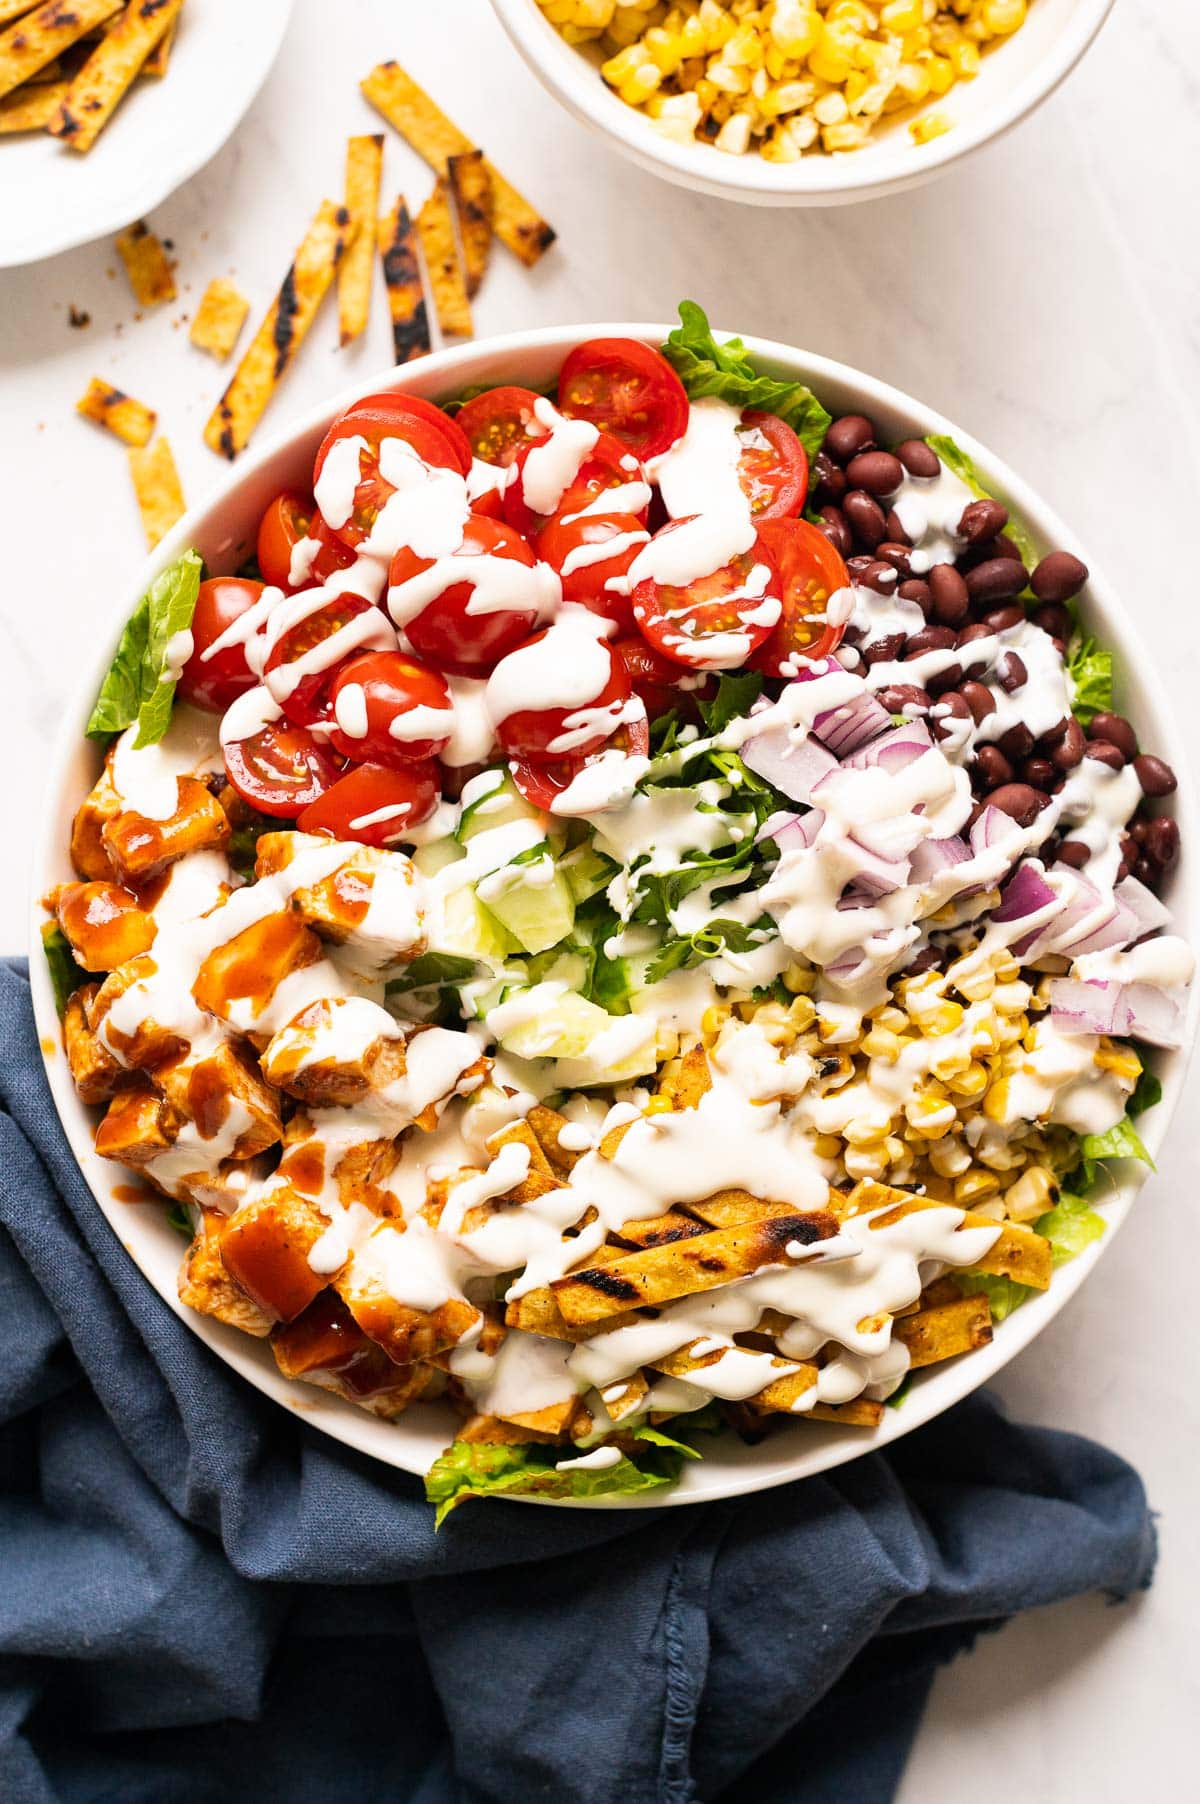 BBQ chicken salad drizzled with ranch dressing in a bowl.